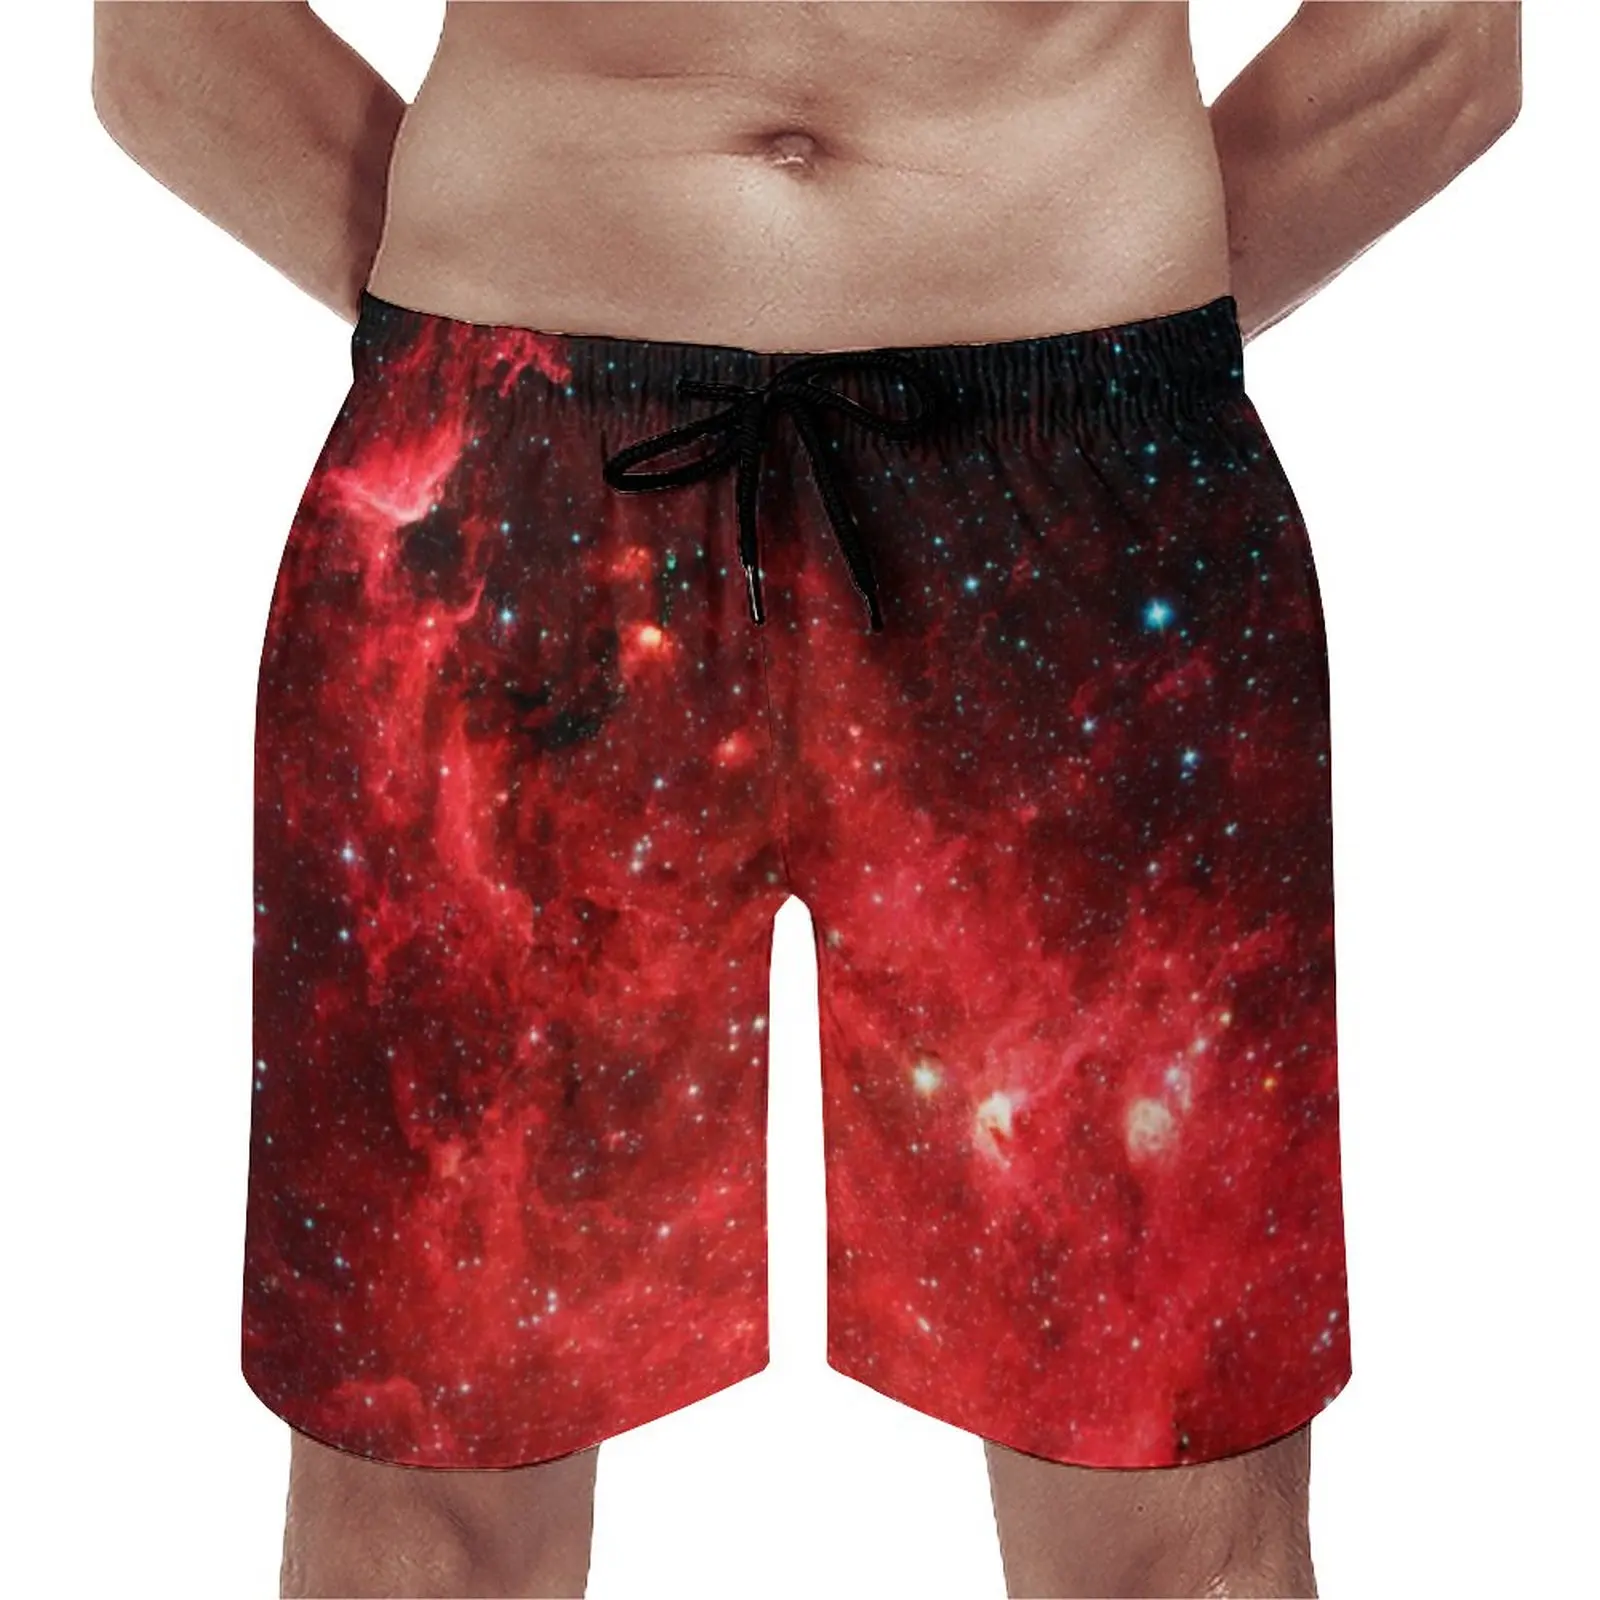 

Red Galaxy Sky Gym Shorts Summer North America Nebula Surfing Beach Short Pants Man Quick Dry Funny Oversize Swimming Trunks